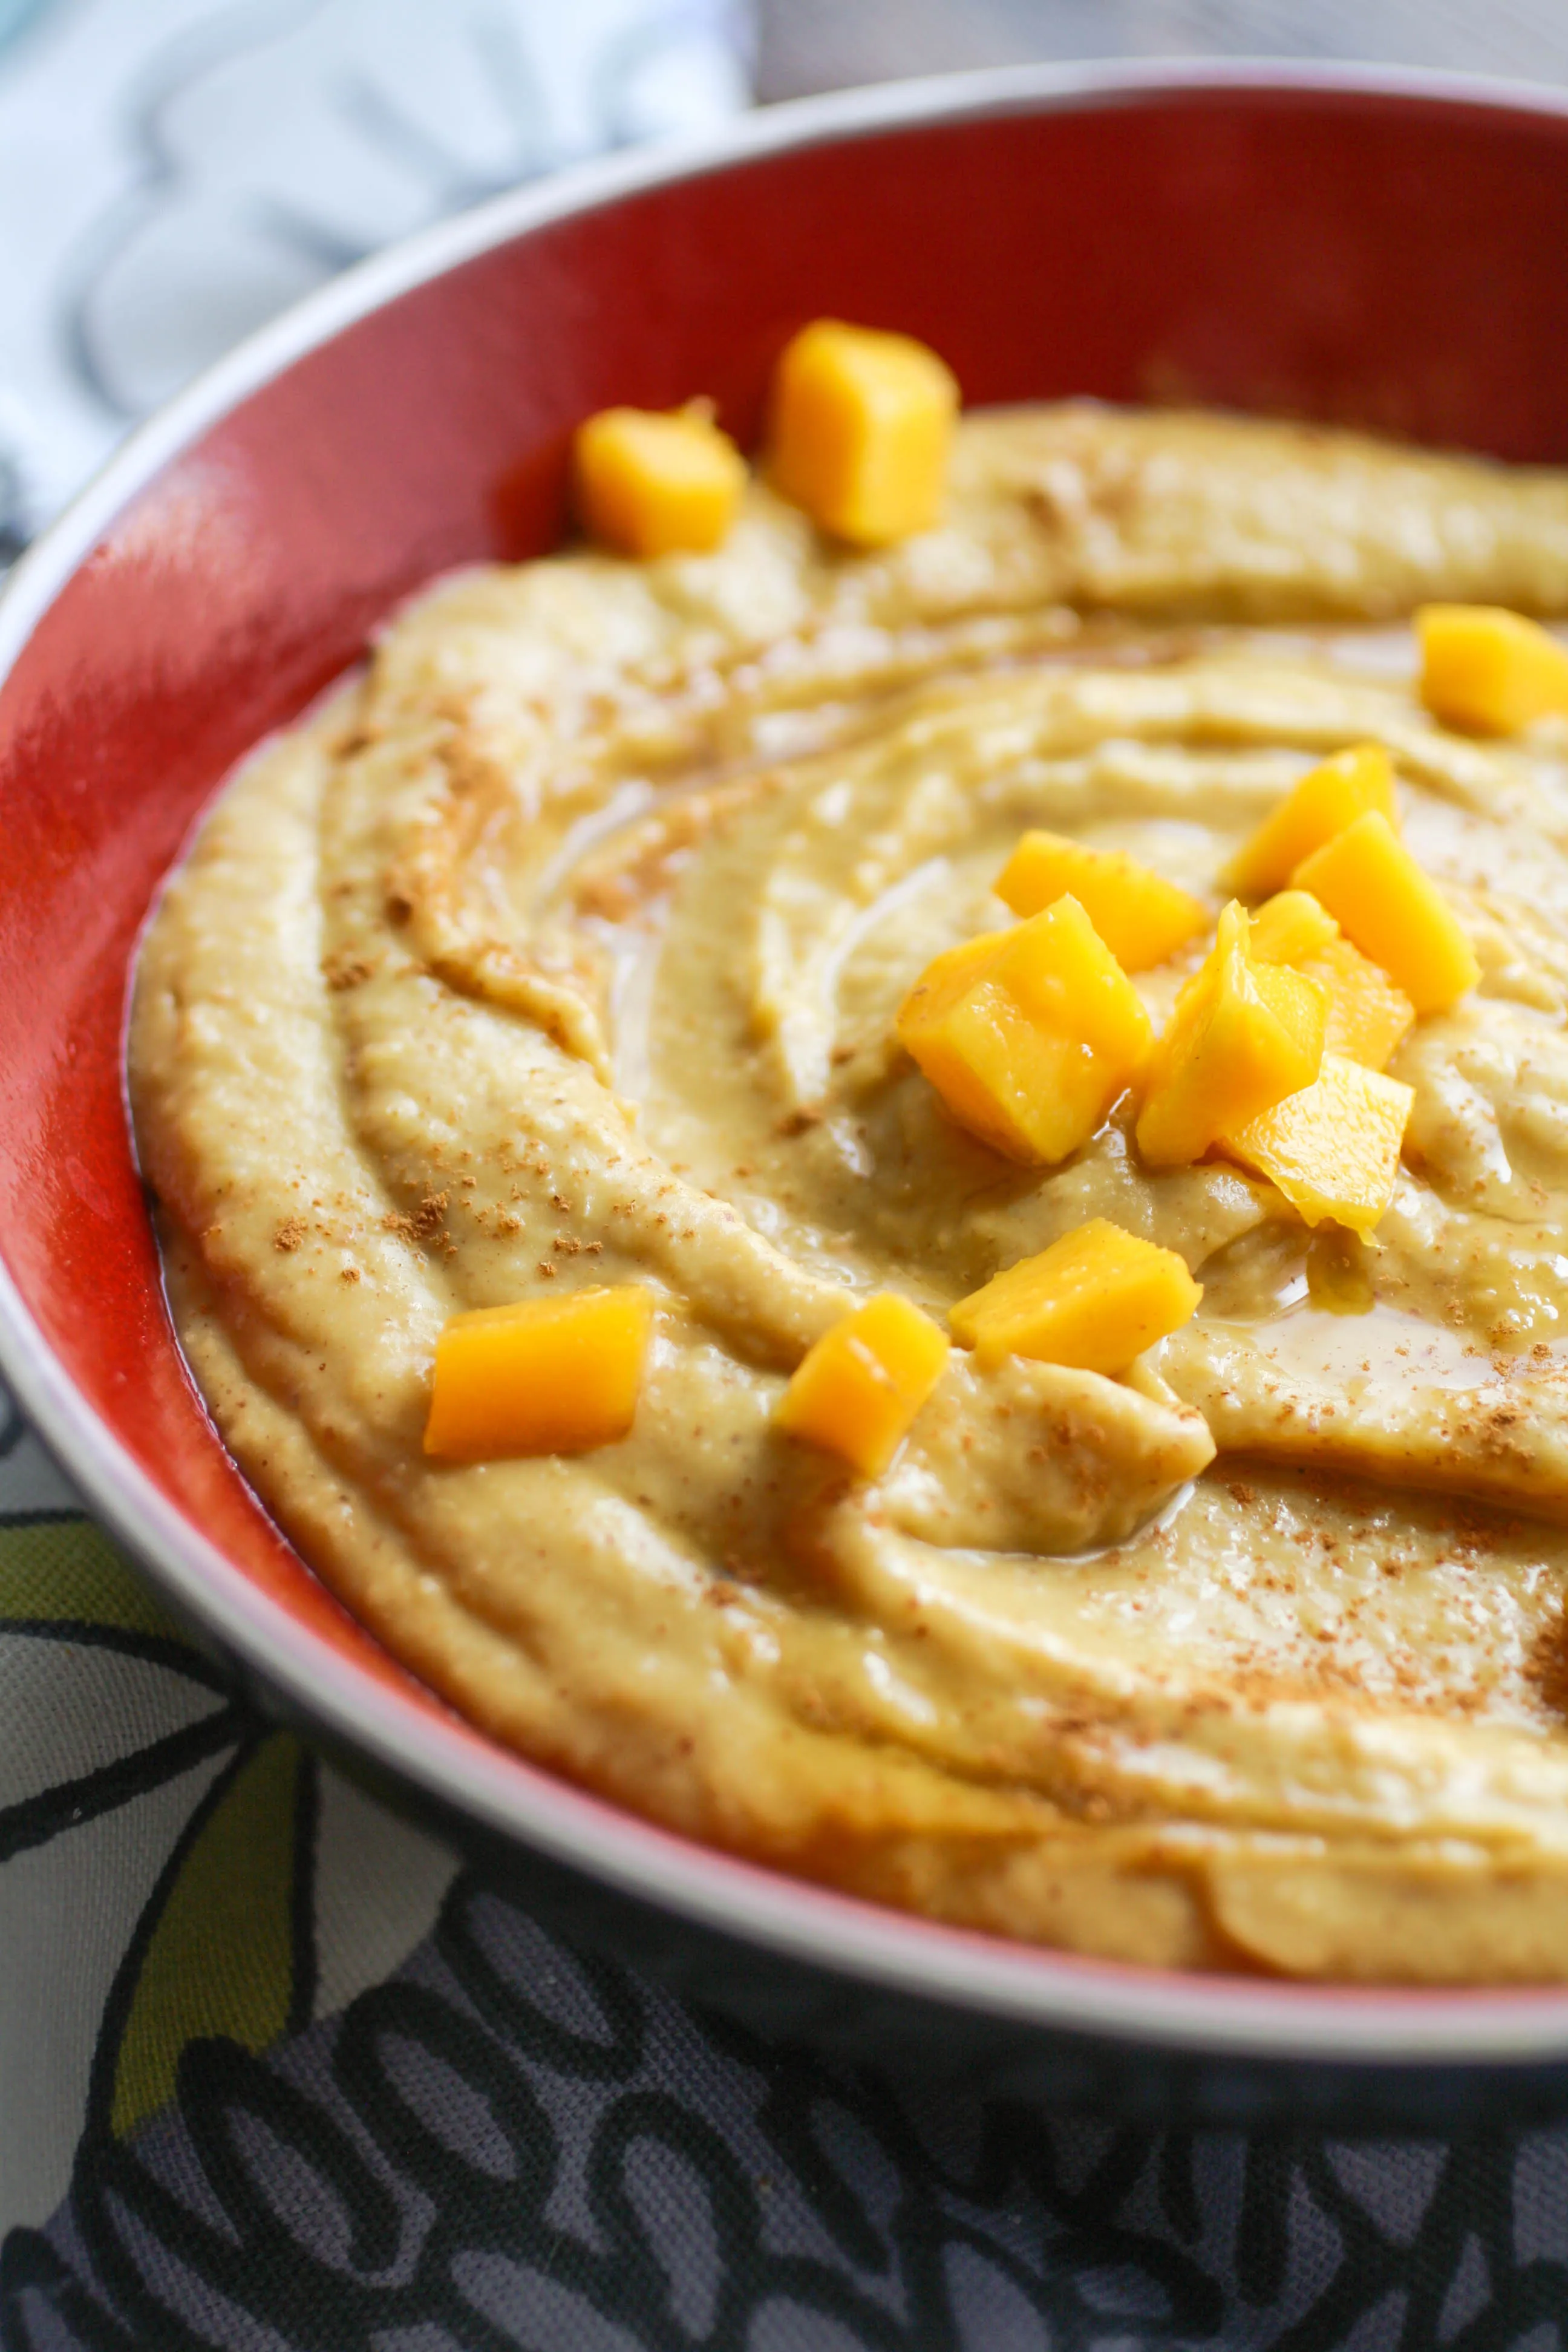 Honey-Mango Dessert Hummus is a fabulous, unexpected treat. You'll love it as a mid-afternoon snack, or served after dinner.